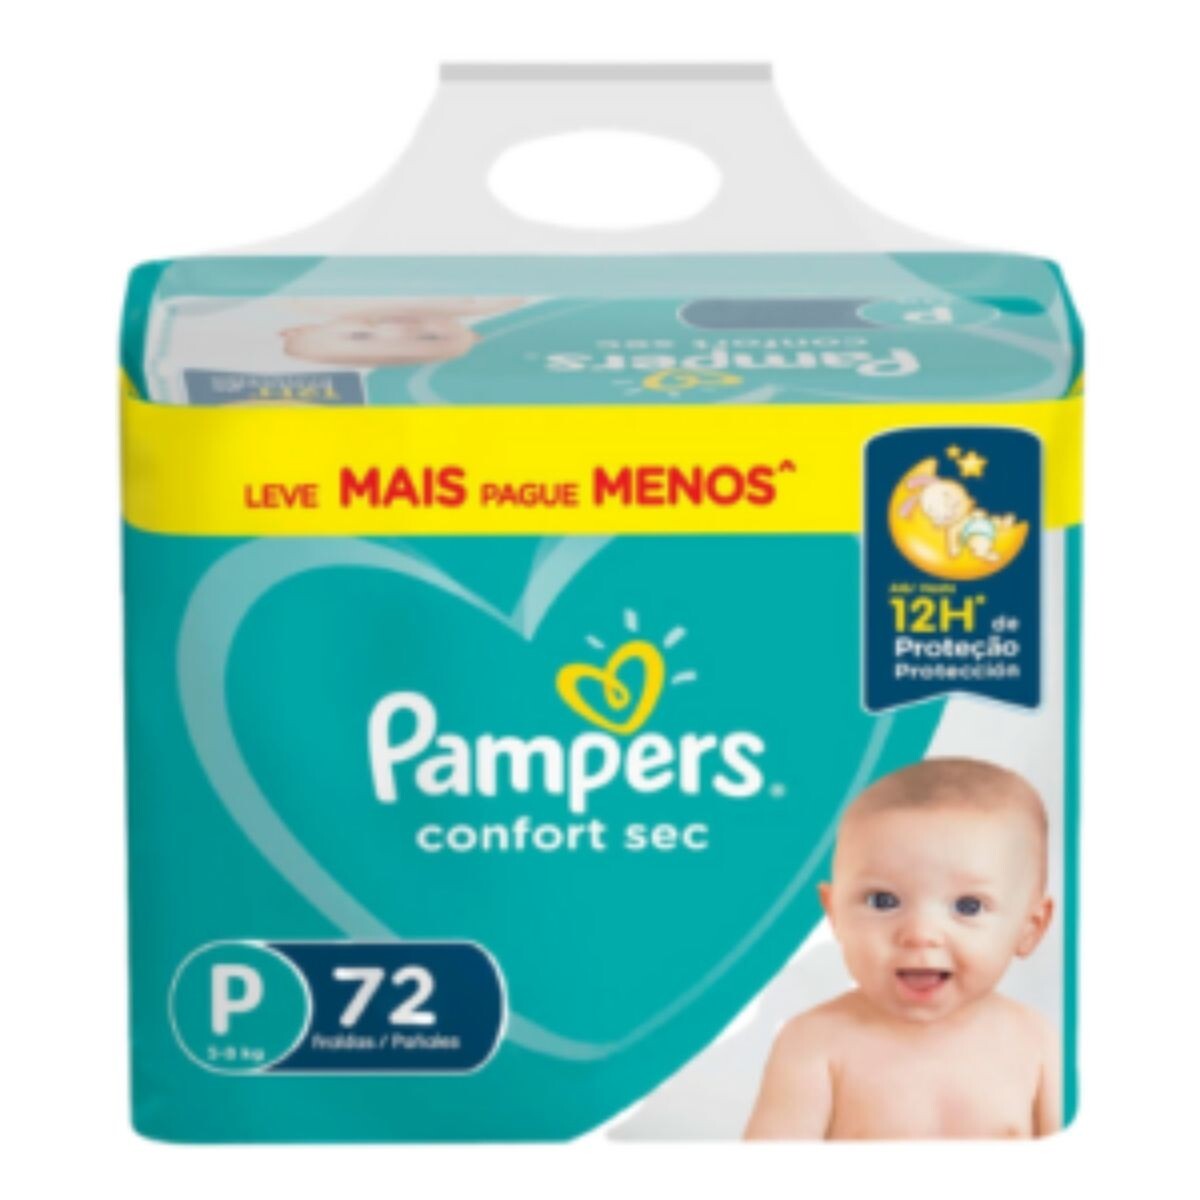 Pañales Pampers Confort Sec P X72 